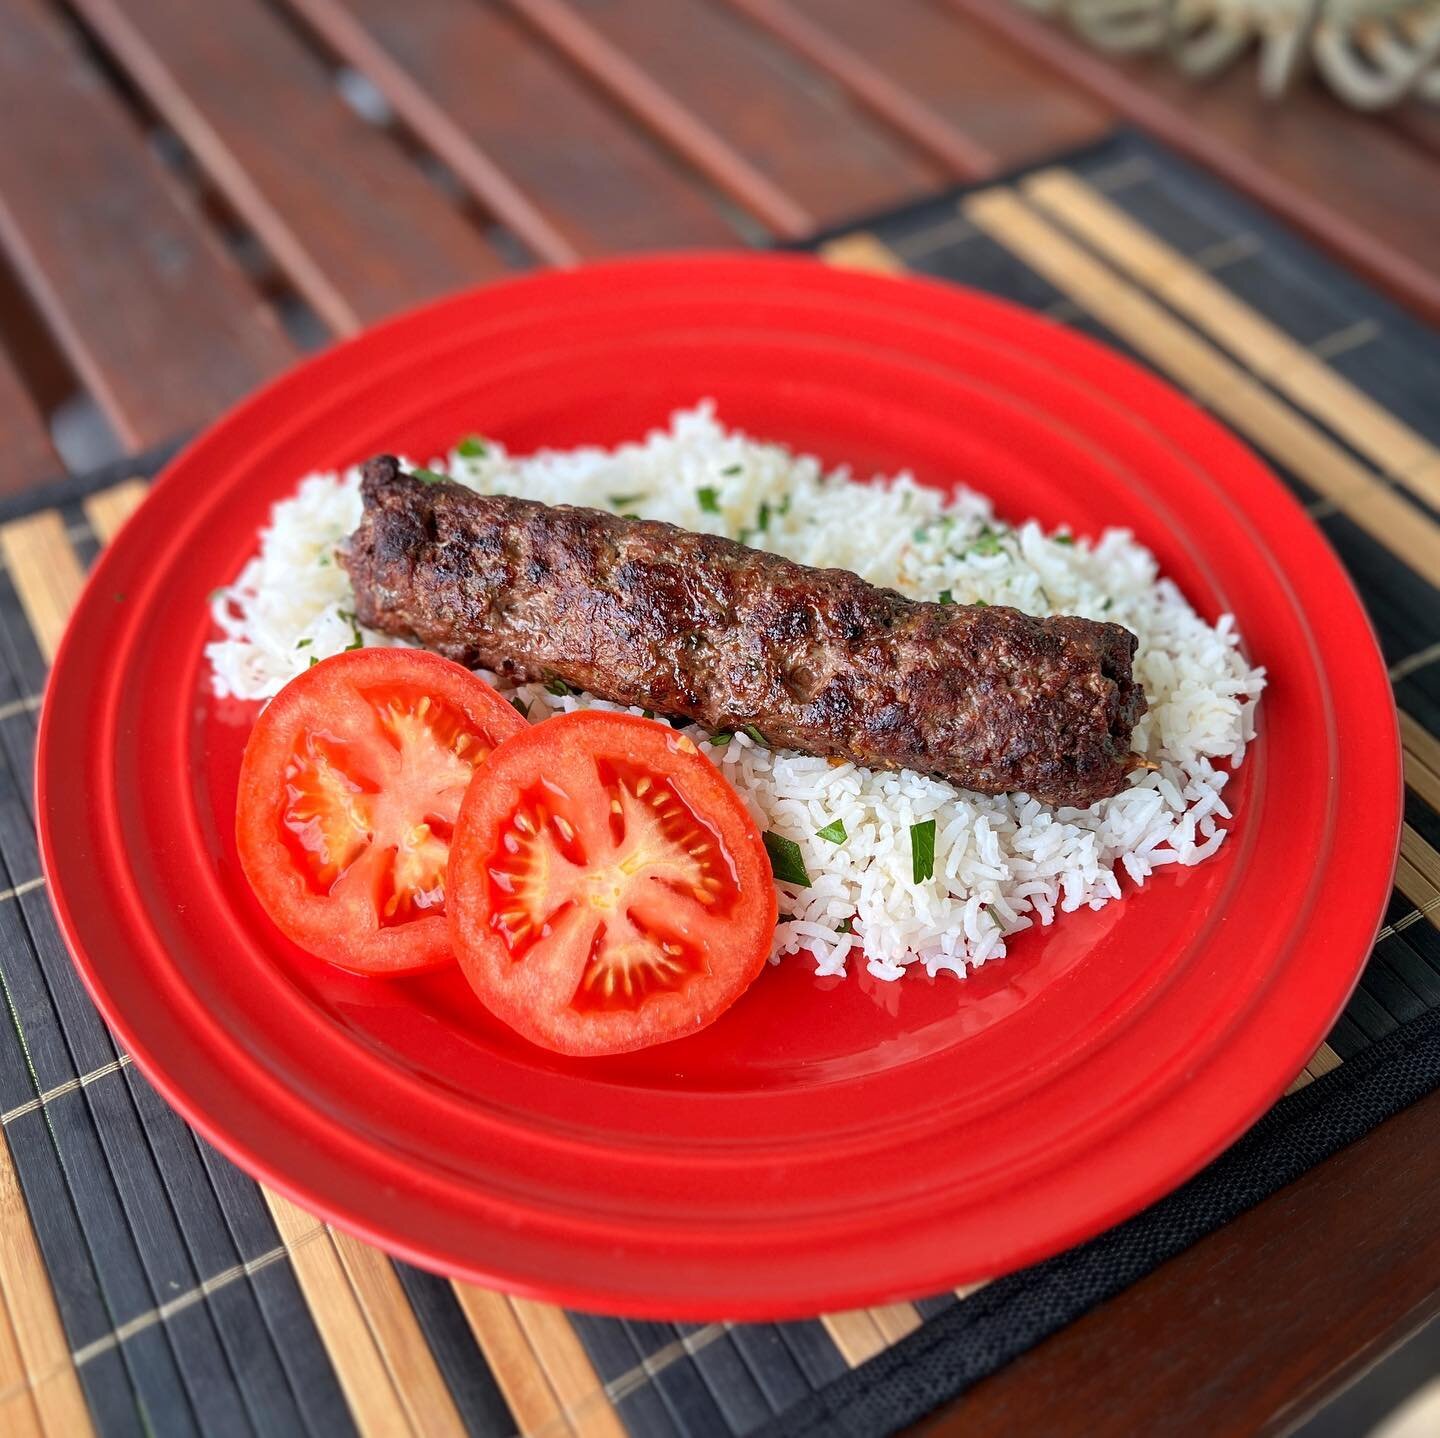 Beef Kefta w/ Parsley Basmati Rice and Tomatoes. Grilled on the @webergrillsca G2.
.
.
.
#beef #lebanese #dinner #local #yum #yummy #yumyum #homemade #eat #eatbetter #food #foodporn #recipe #sharefood #delicious #eating #foodpic #foodpics #cooking #h